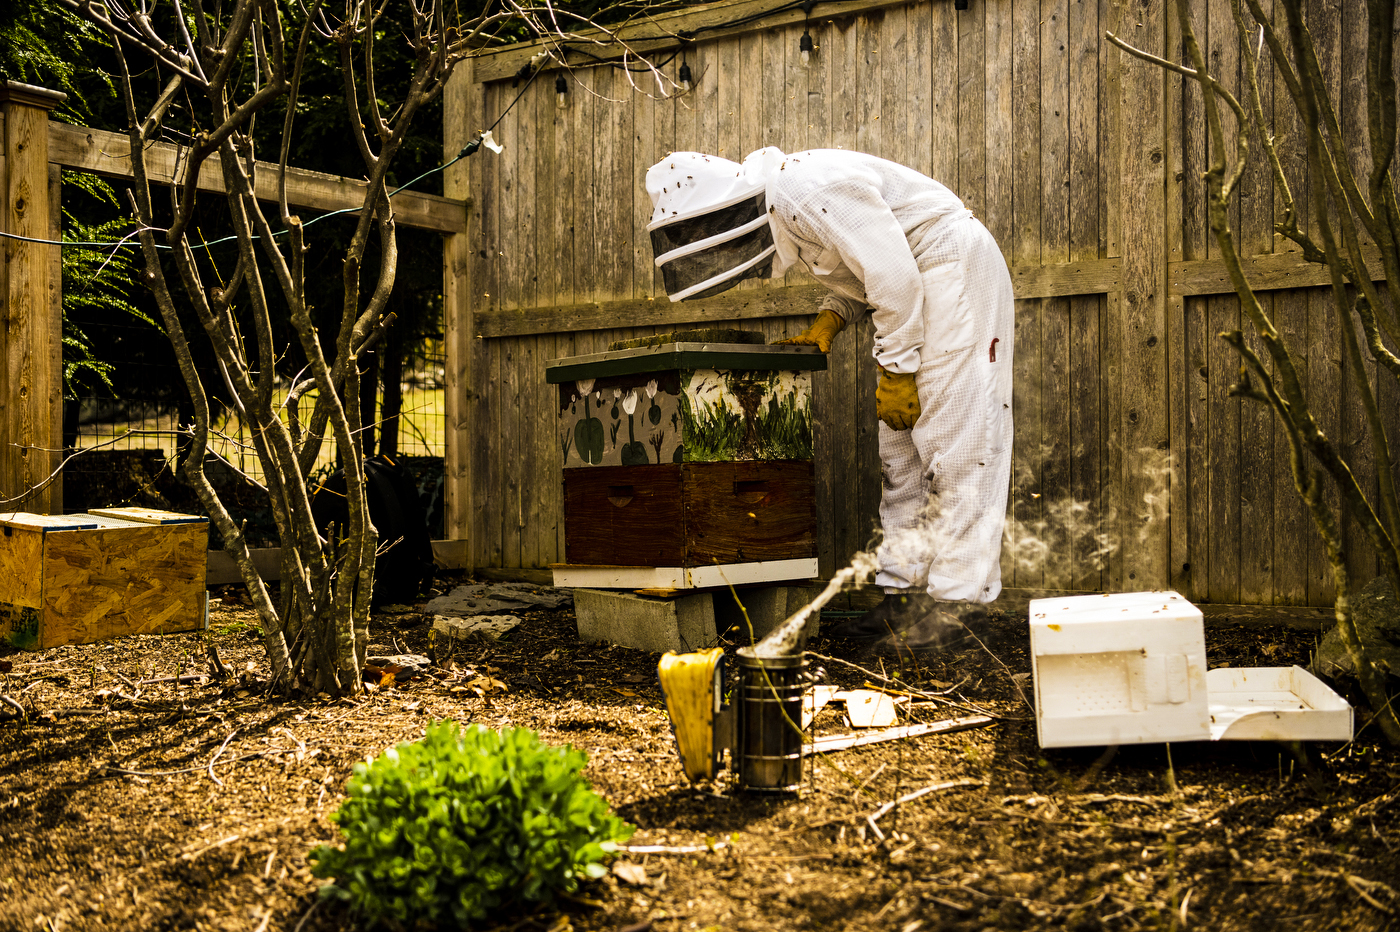 Katherine Antos tends to a hive of bees outside in a private residence.